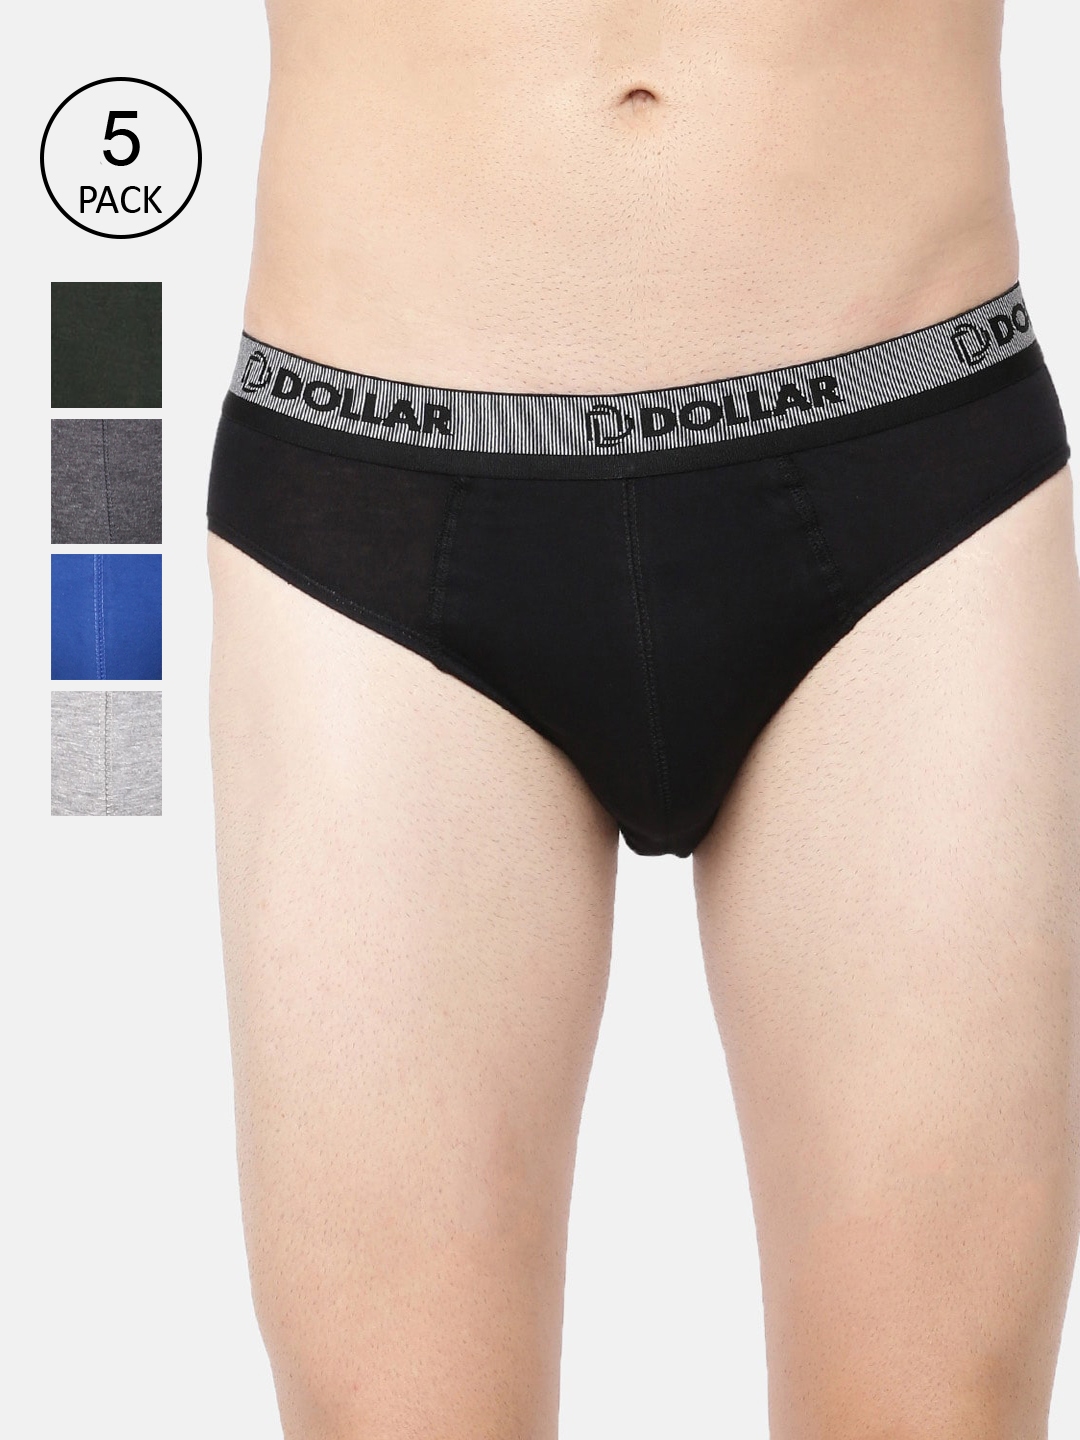 Dollar Bigboss Men Combed Cotton Double Pouch Support Brief